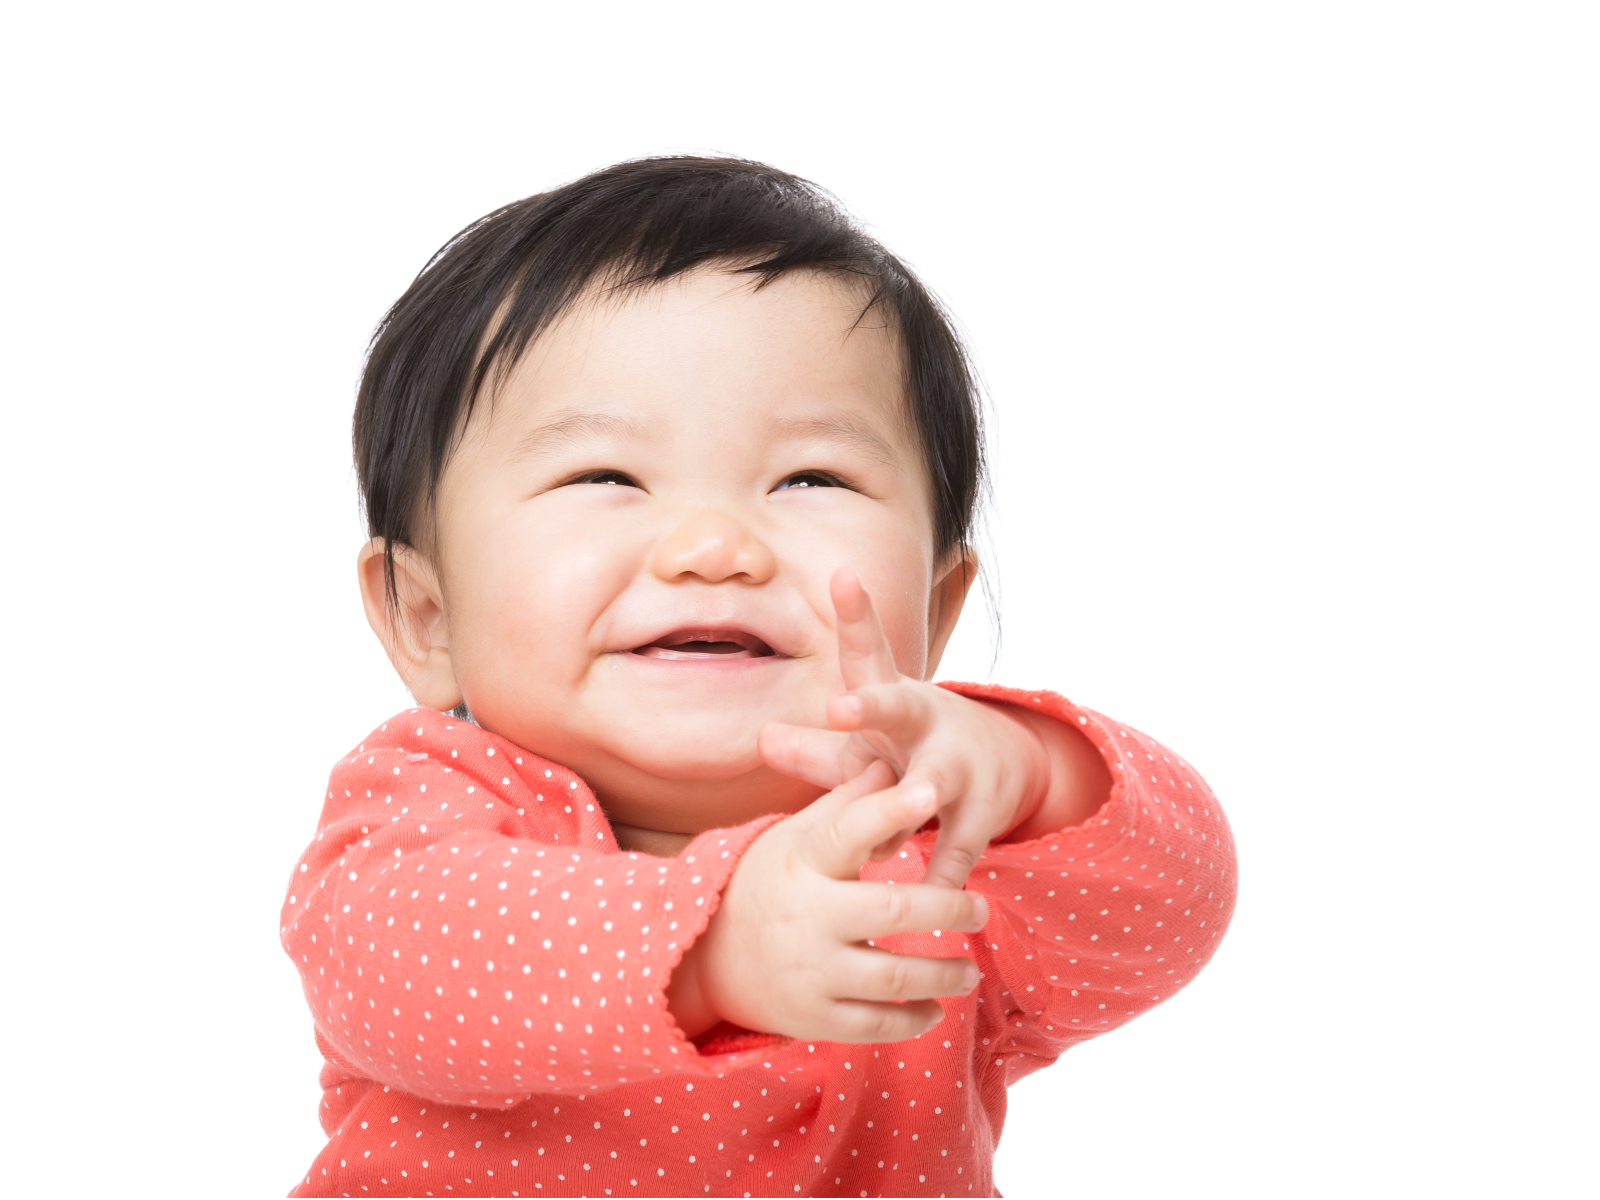 Clapping Baby Development: The Importance of Early Motor Skills